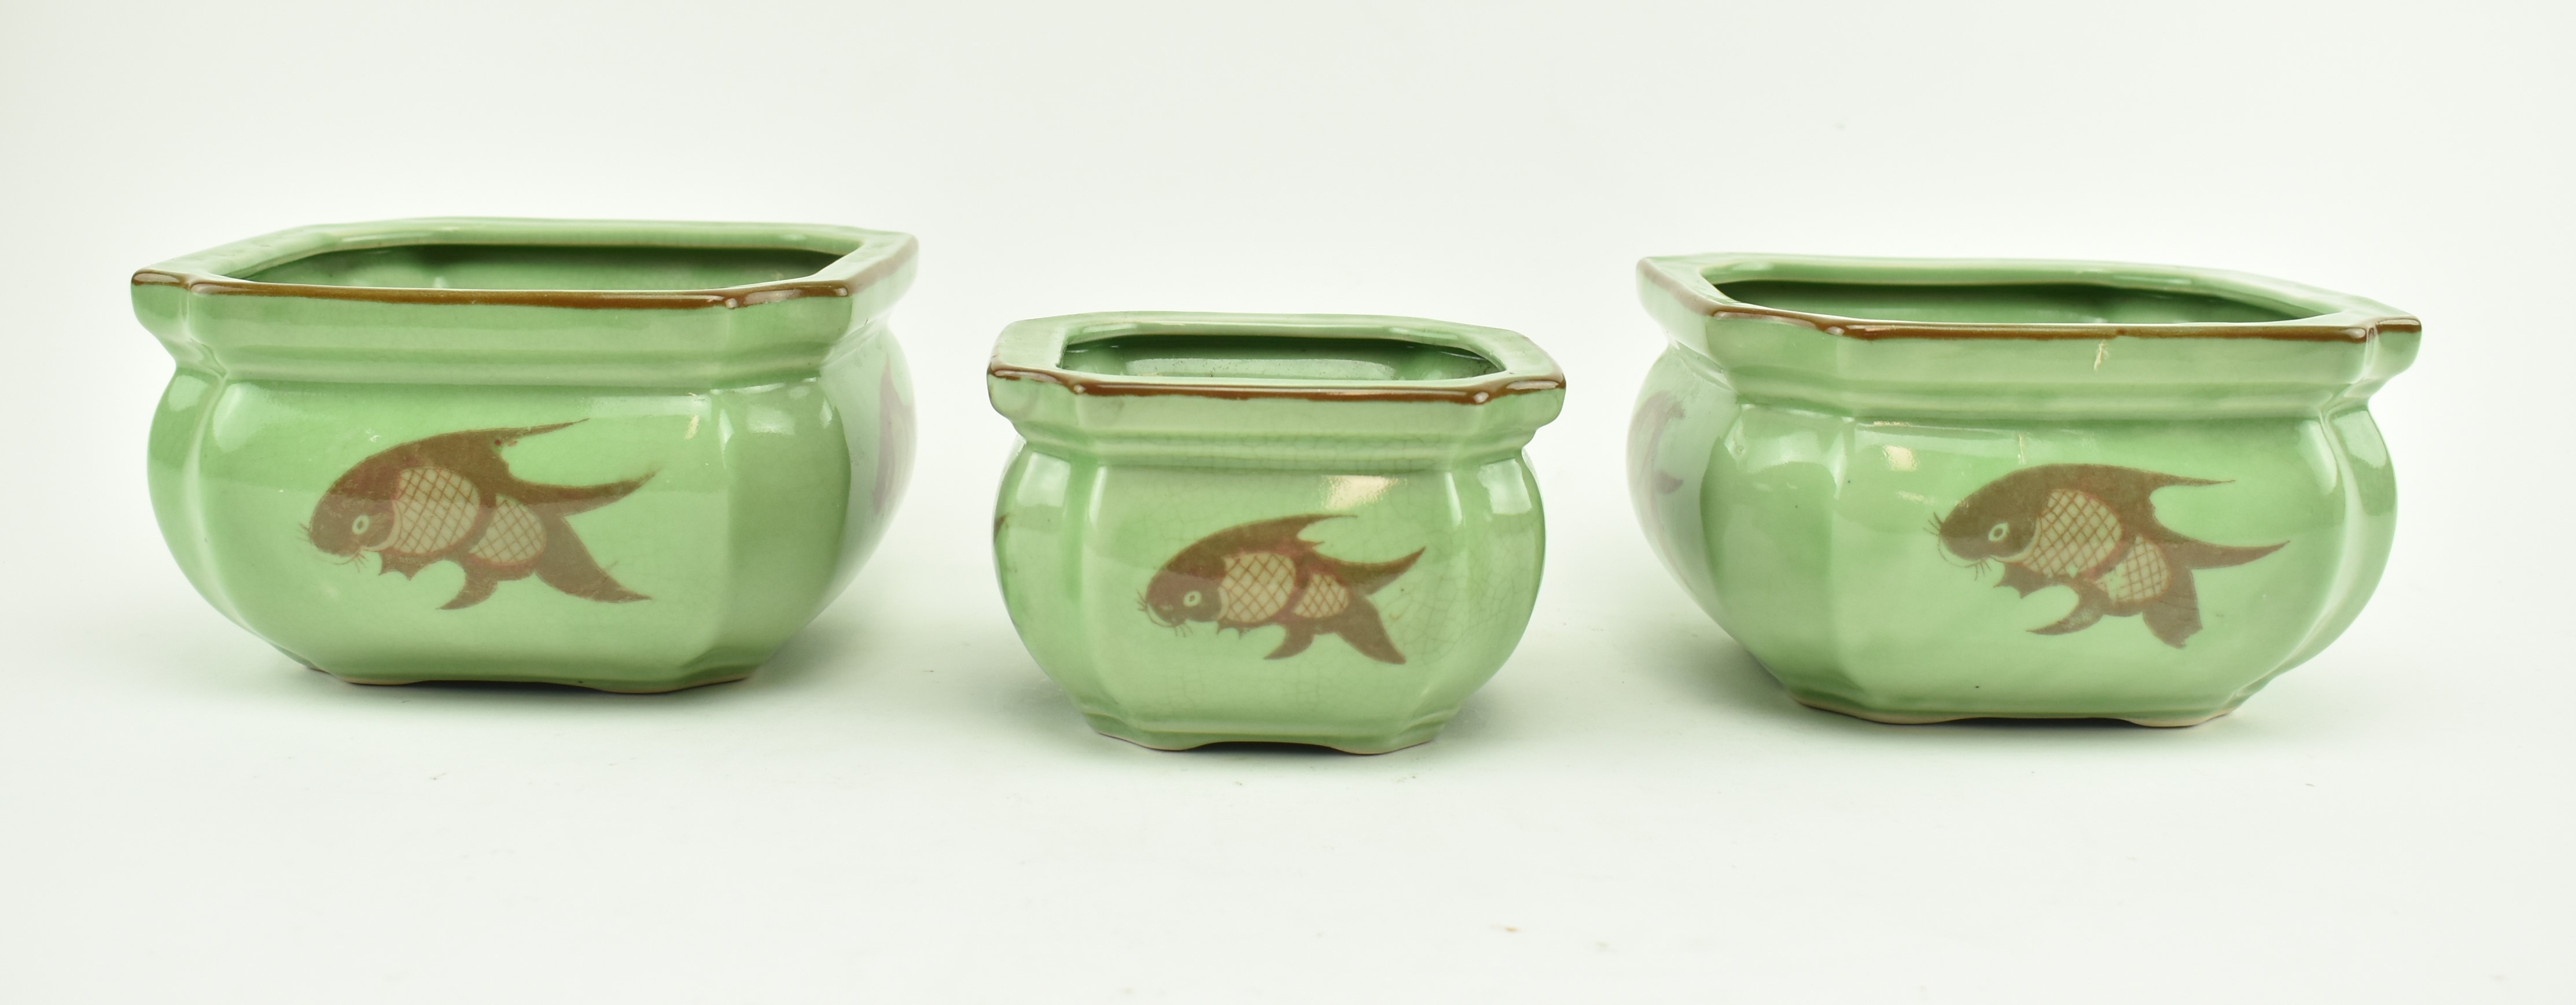 COLLECTION OF THREE CHINESE CRACKLE CERAMIC KOI FISH POTS